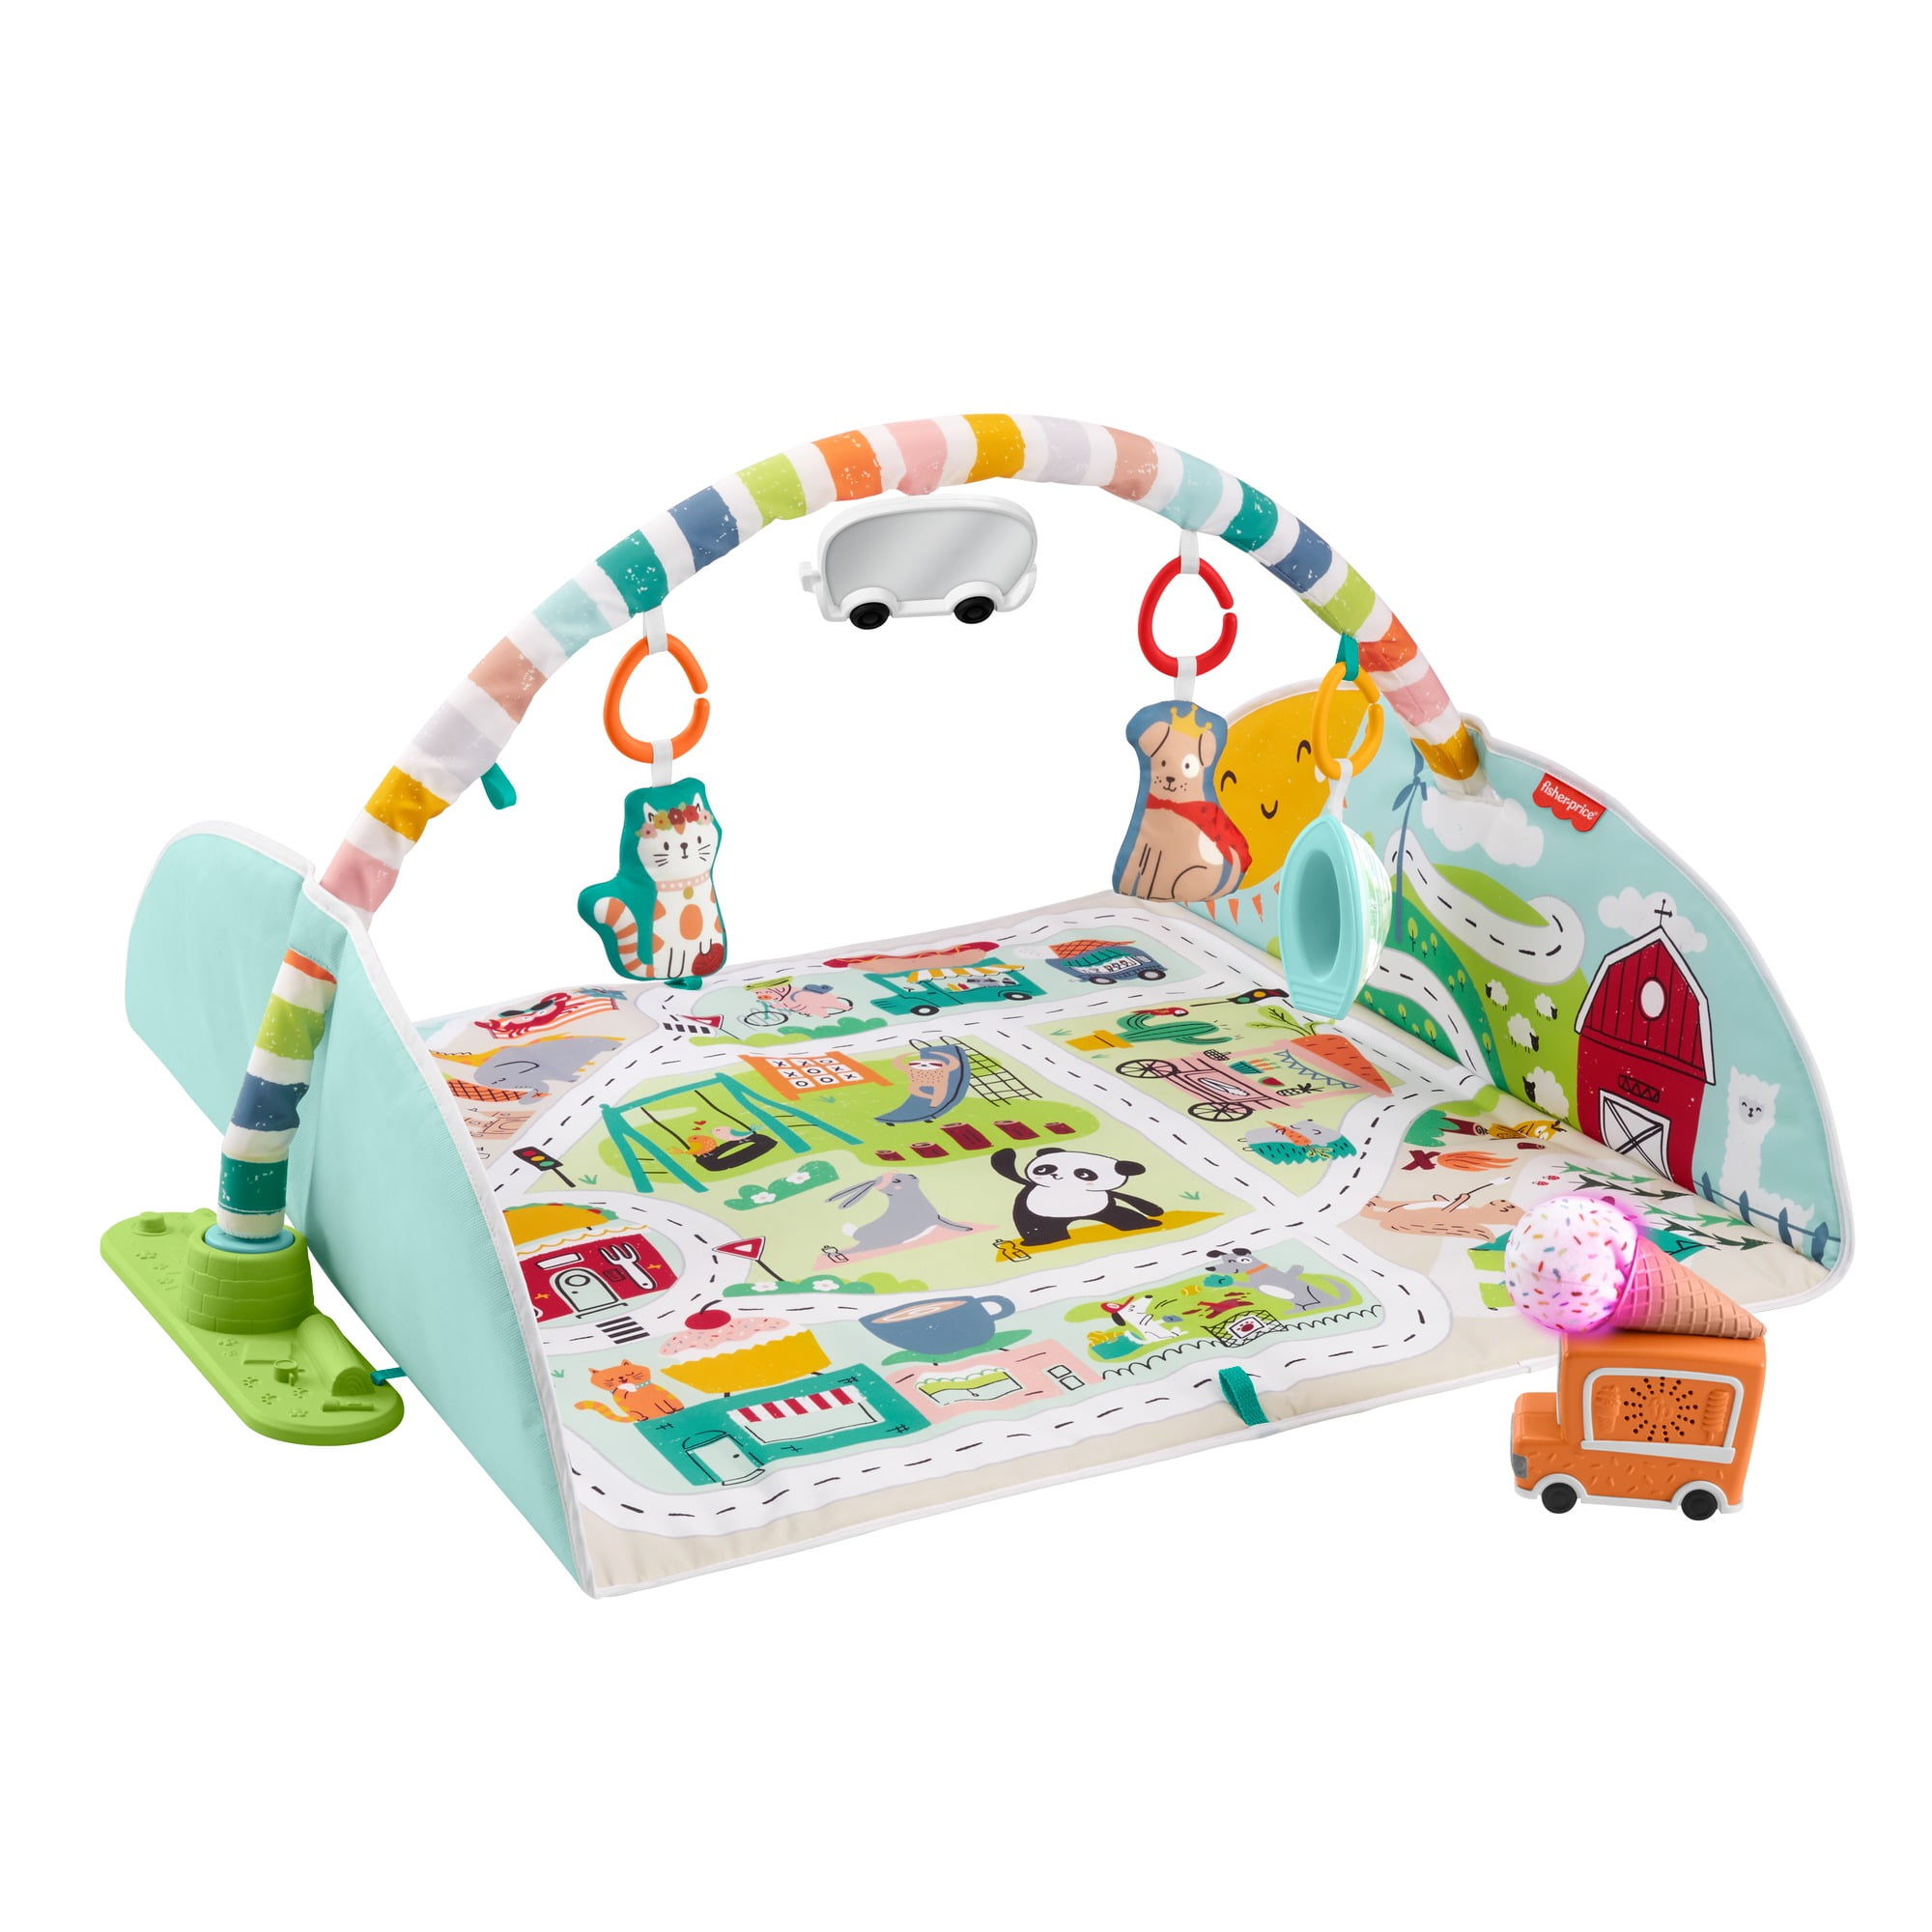 MiniDream Baby Large Soft Playmat Activity Gym Play Mat with Storage Bag 